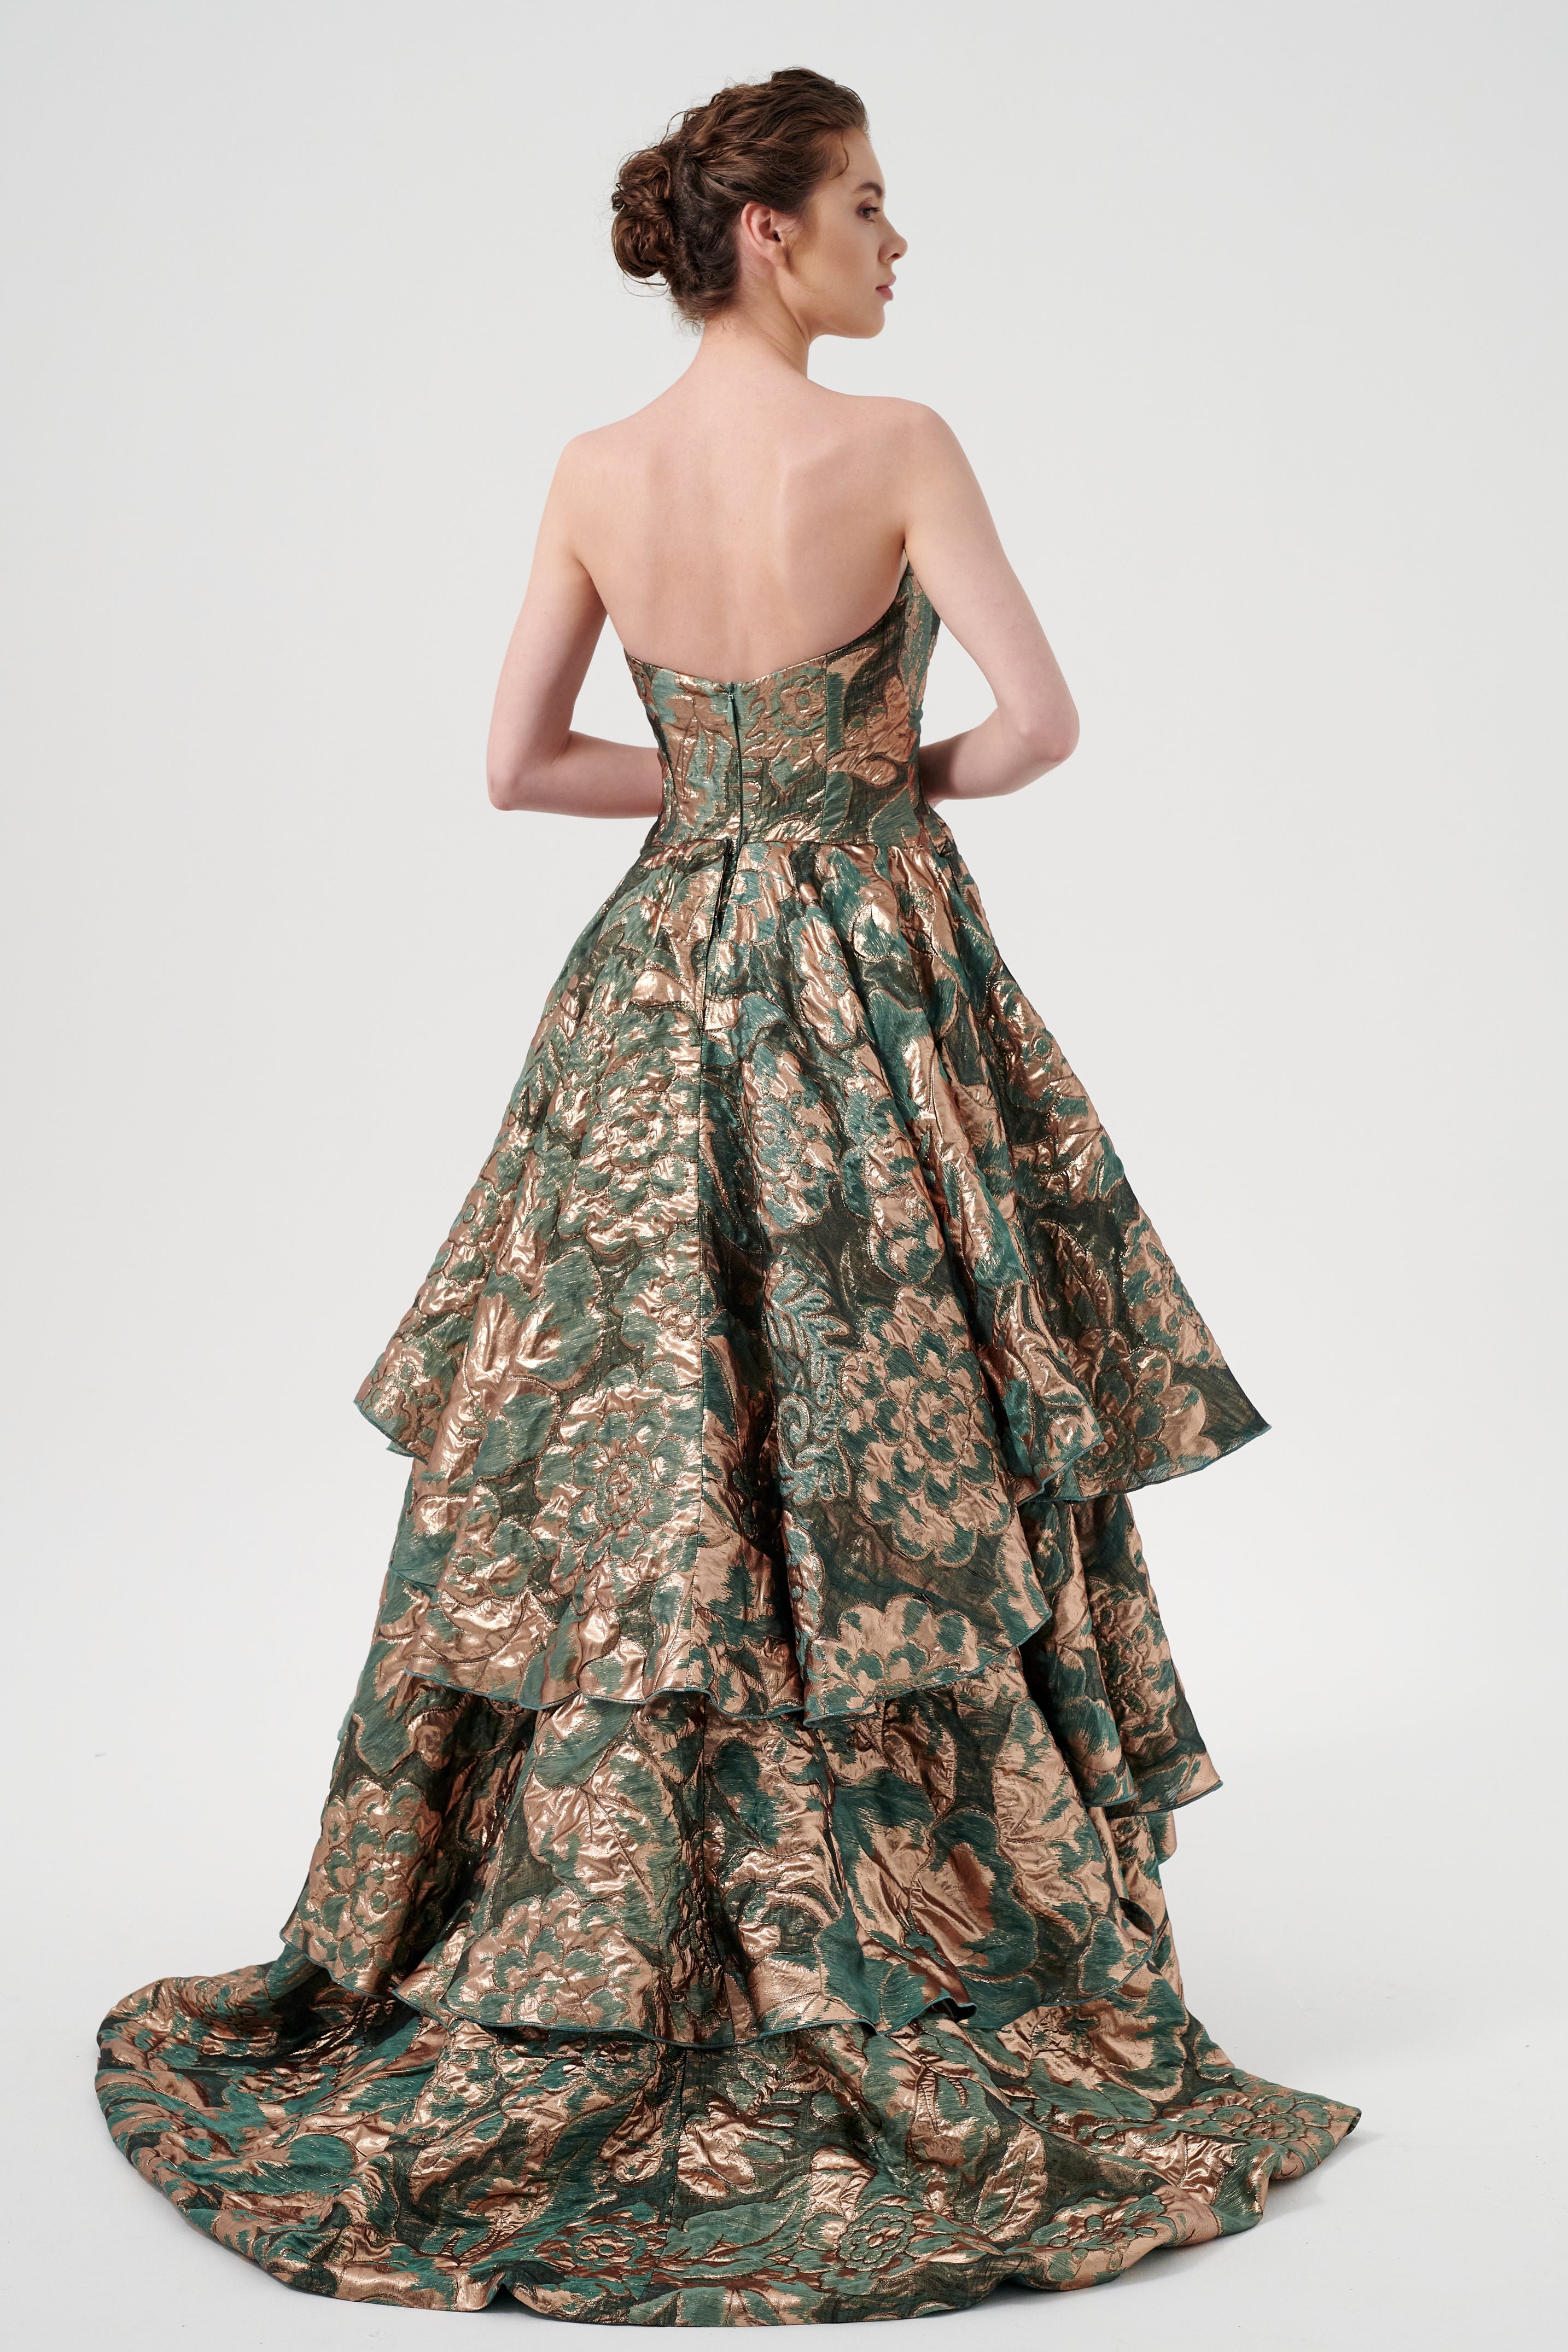 Floral Jacquard Gown With A Strapless Neckline And A High-Low Hem